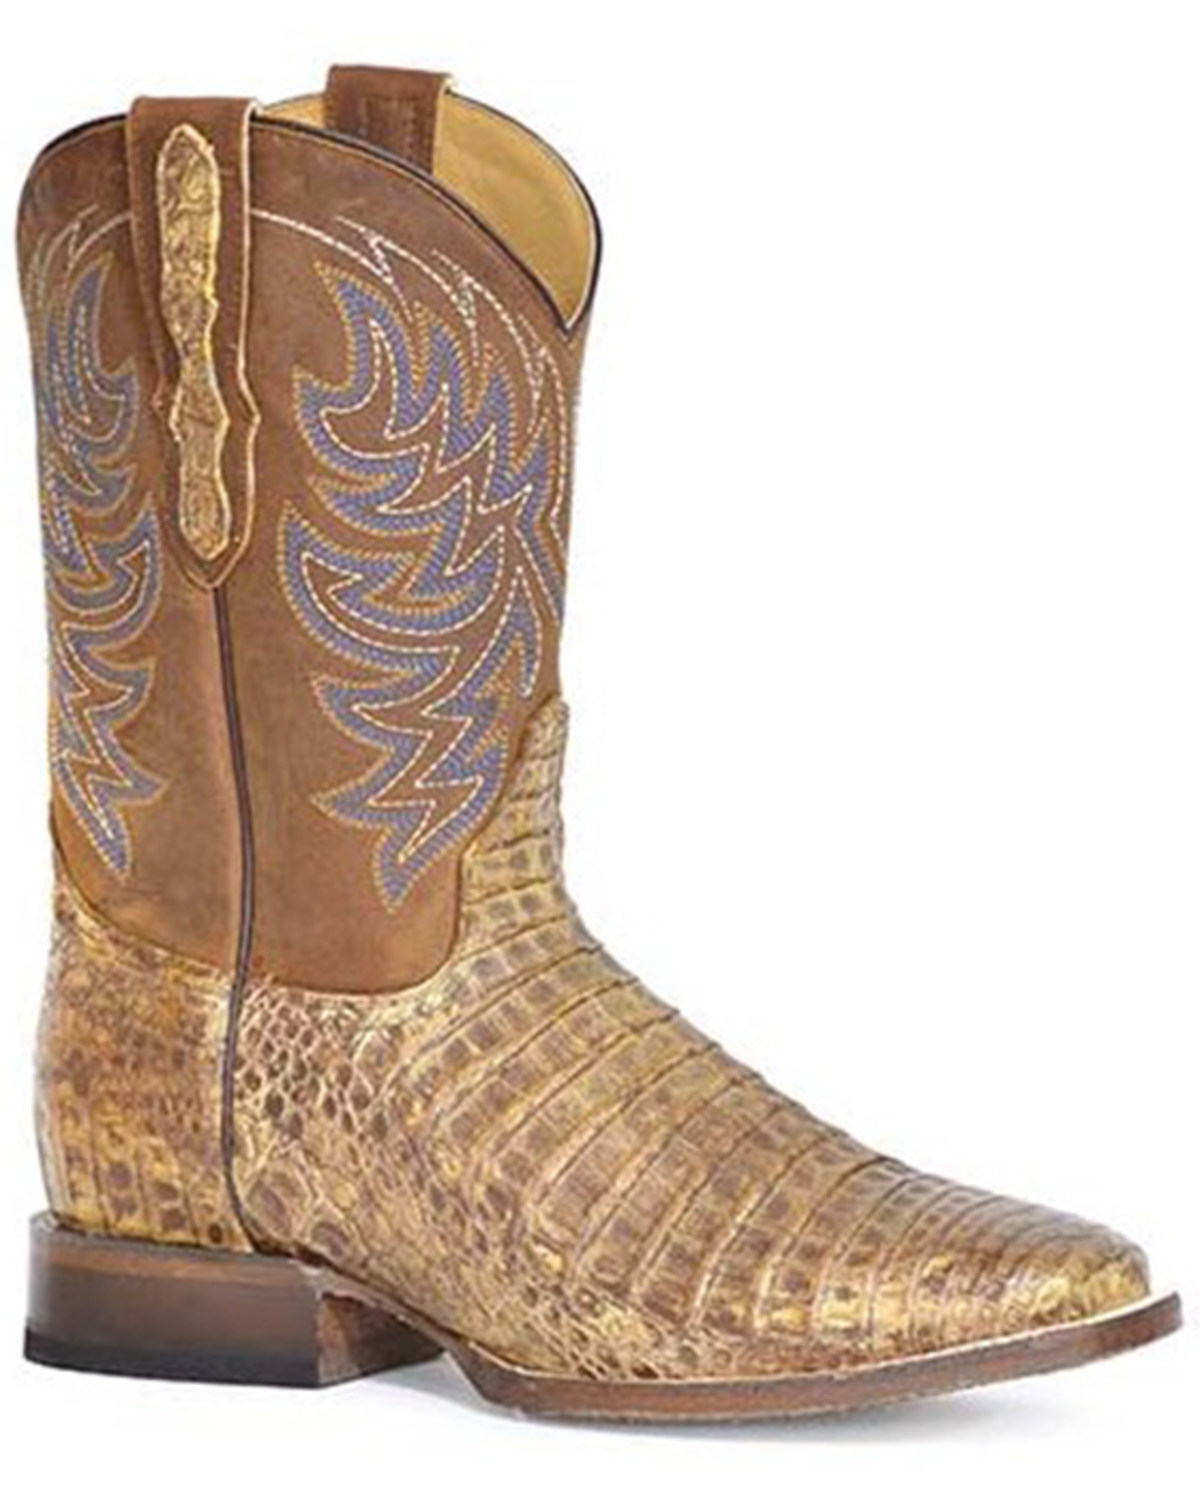 Stetson Men's Cameron Exotic Caiman Western Boots - Broad Square Toe